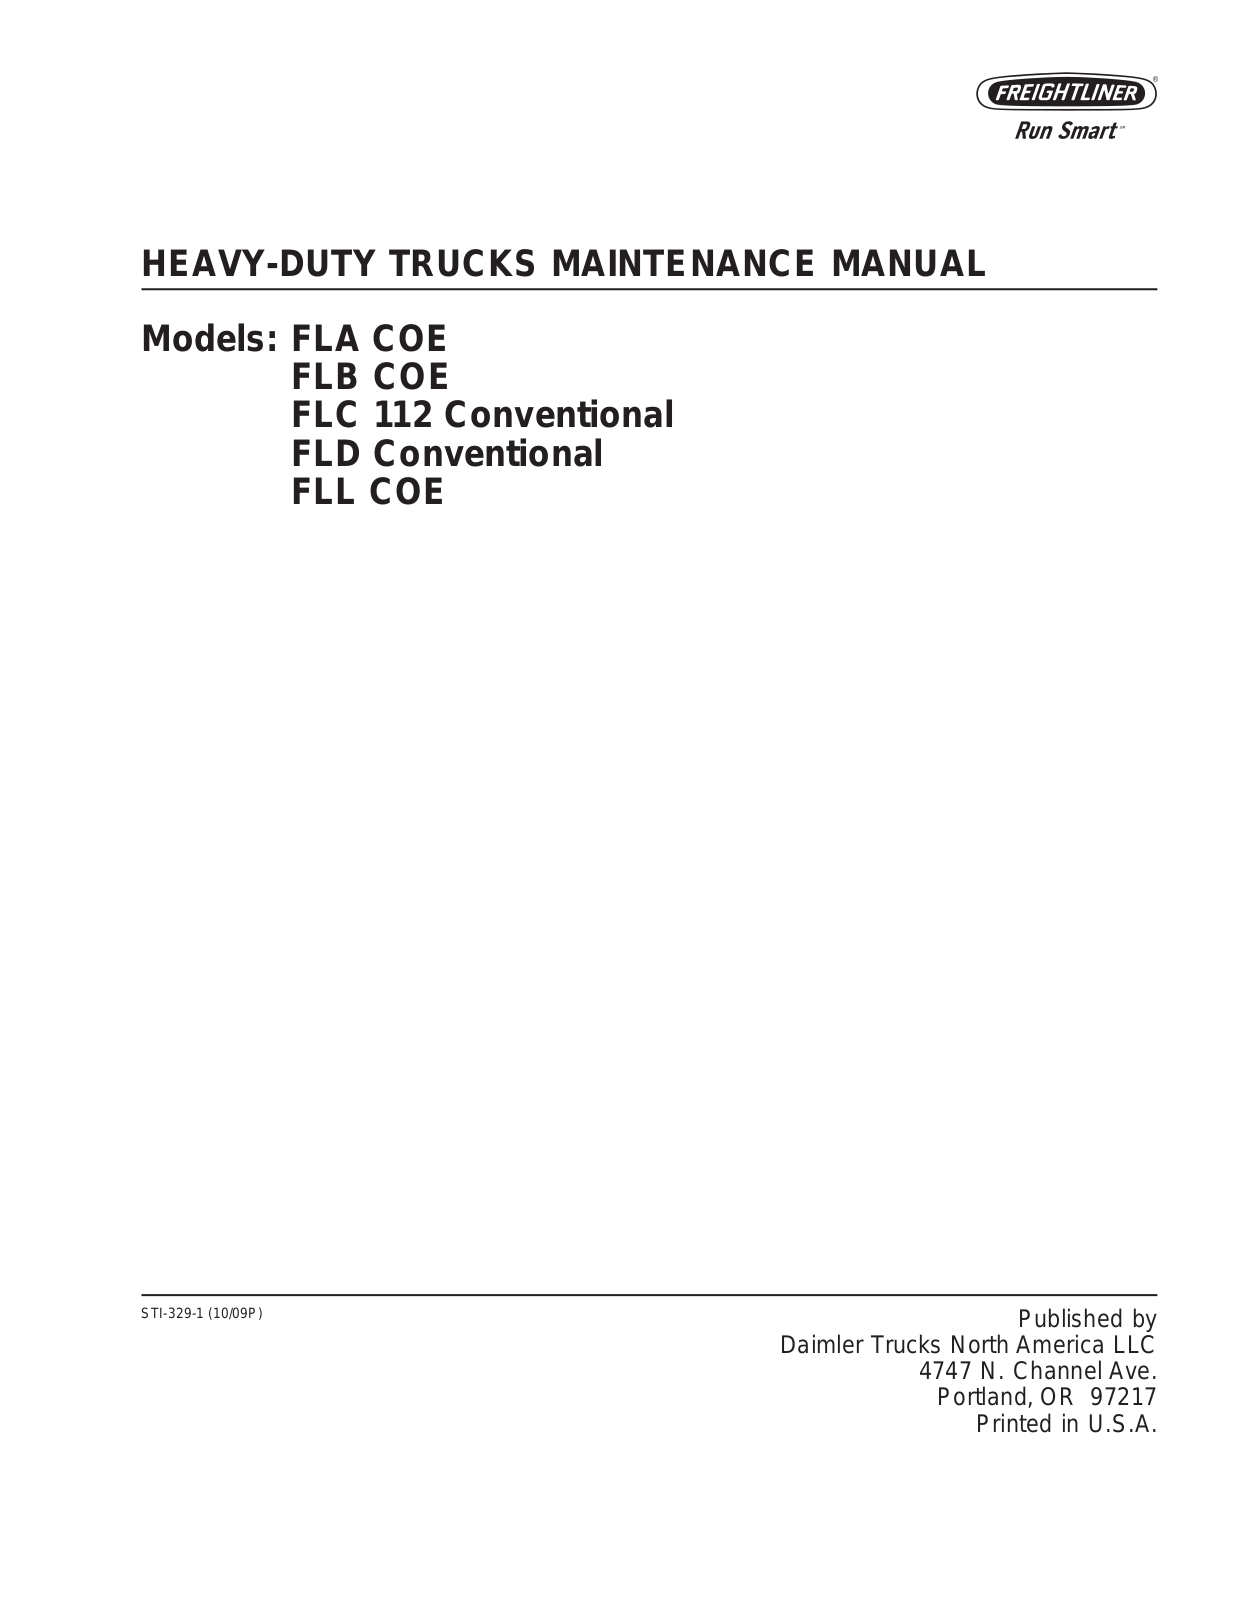 Freightliner FLA COE, FLB COE, FLC 112 Conventional, FLD Conventional, FLL COE Maintenance Manual